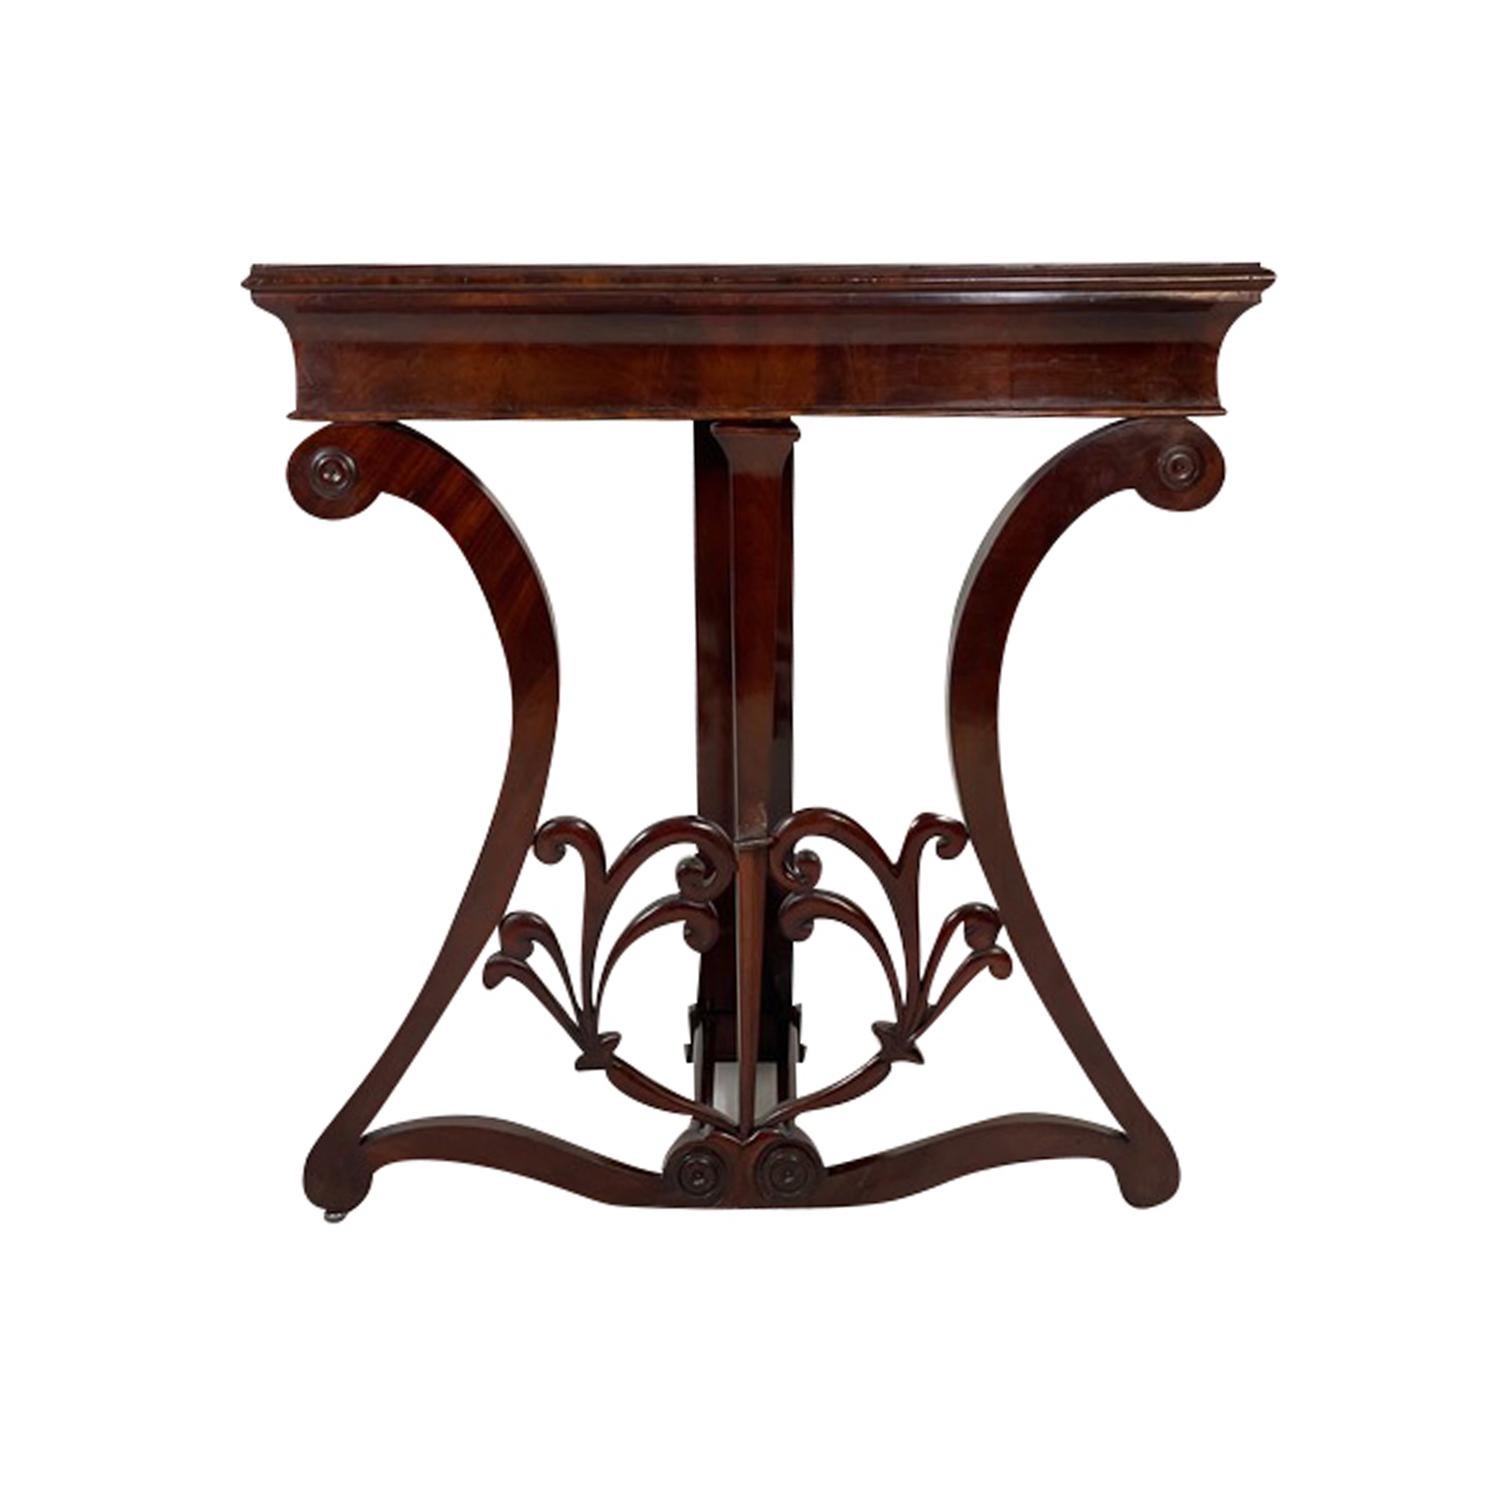 Hand-Carved 19th Century German Biedermeier Antique Walnut Freestanding Console Table For Sale